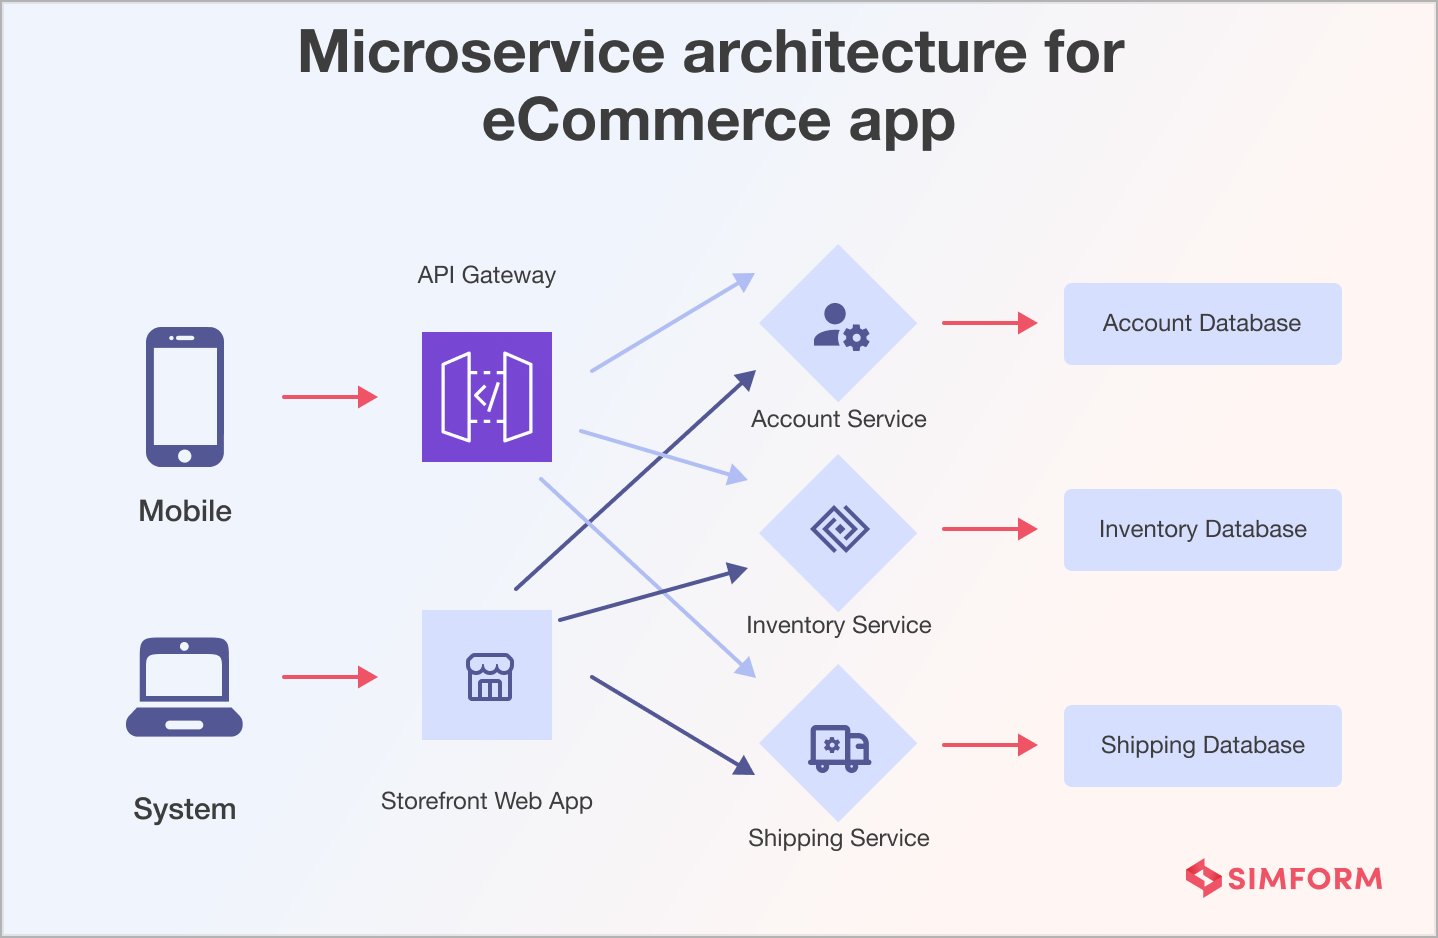 Microservices Architecture for an eCommerce App